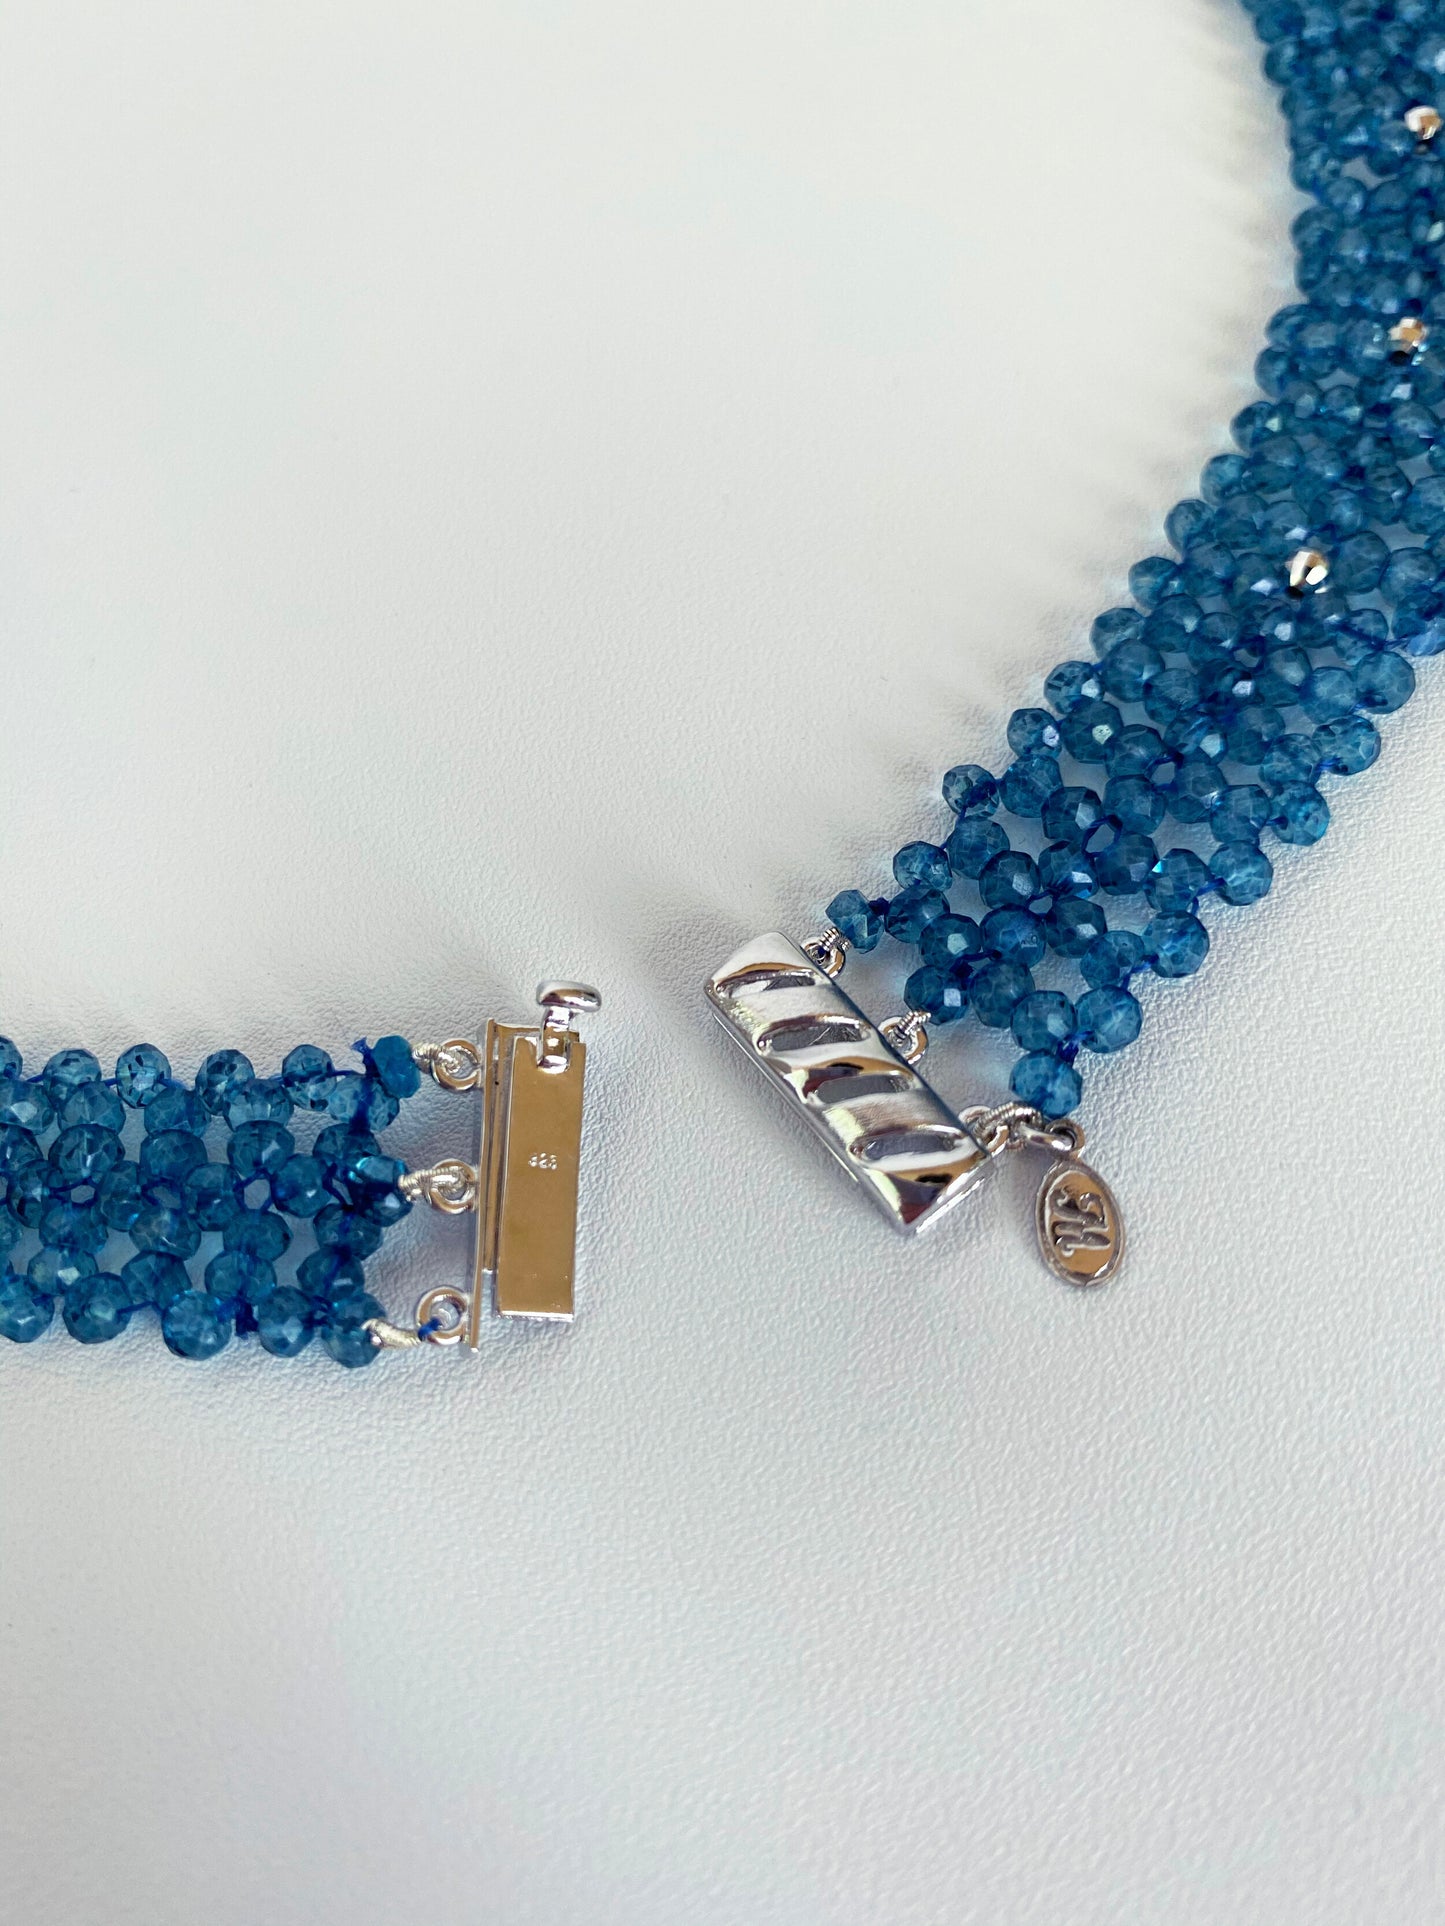 Marina J Woven London Blue Topaz with Briolettes & Faceted Sterling Silver Beads